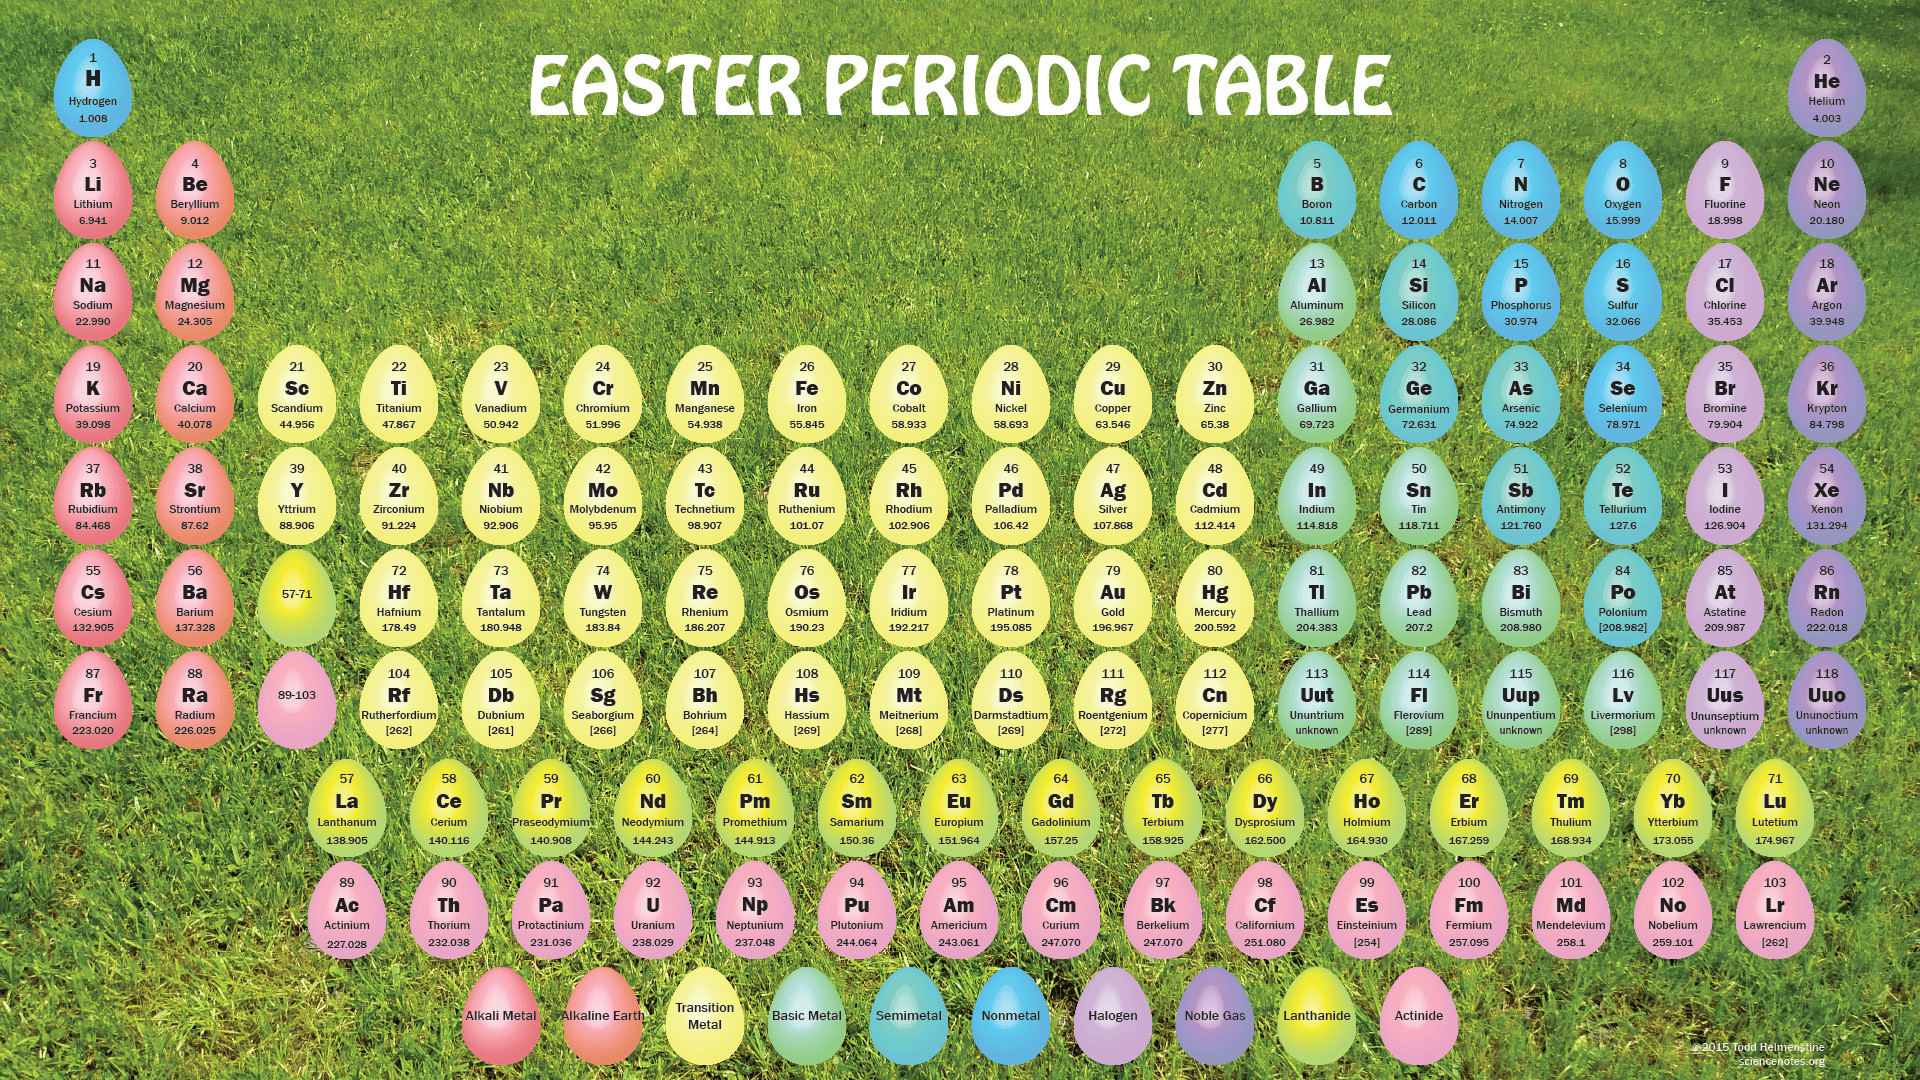 1920x1080 Easter Periodic Table Wallpaper